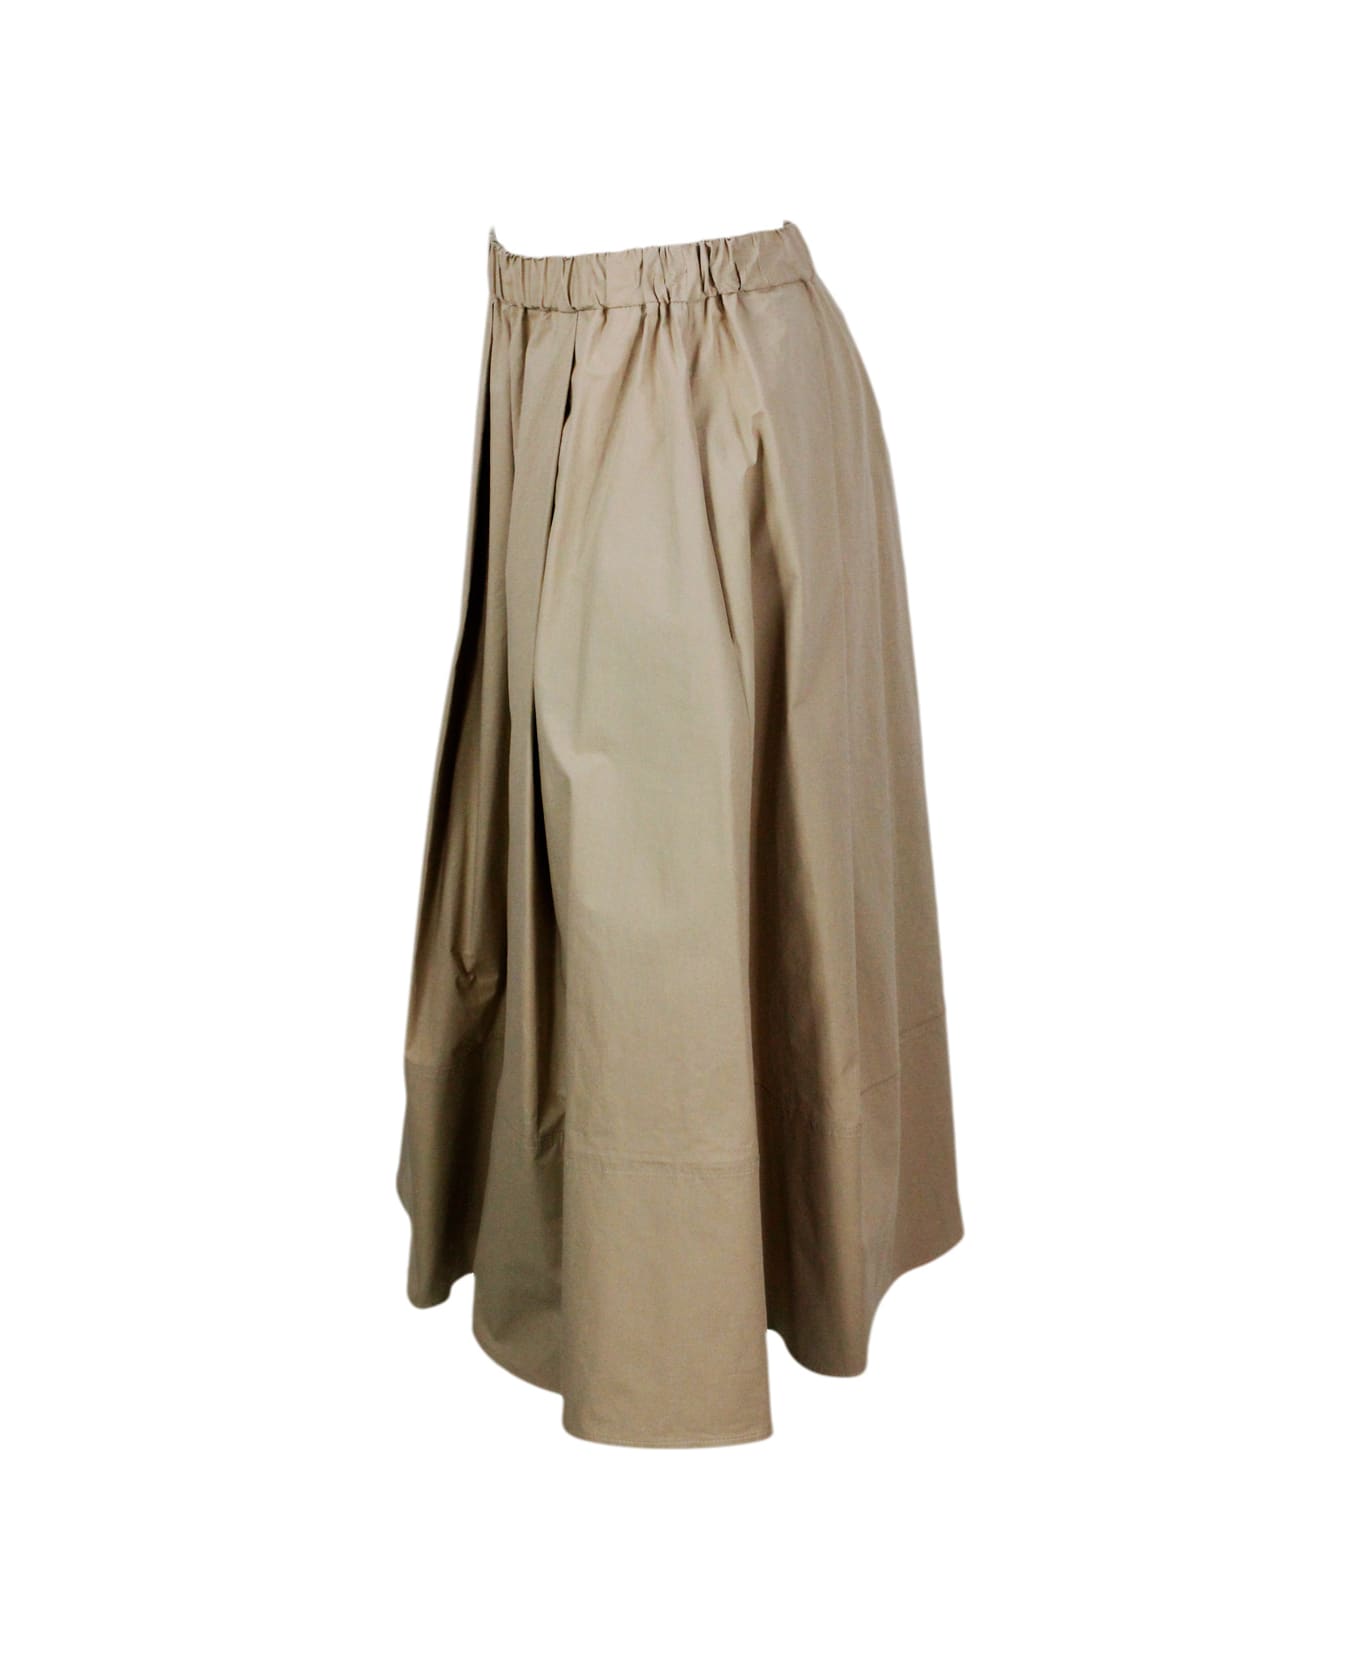 Antonelli Long Skirt With Elastic Waist And Welt Pockets With Pleats Made Of Stretch Cotton - Beige